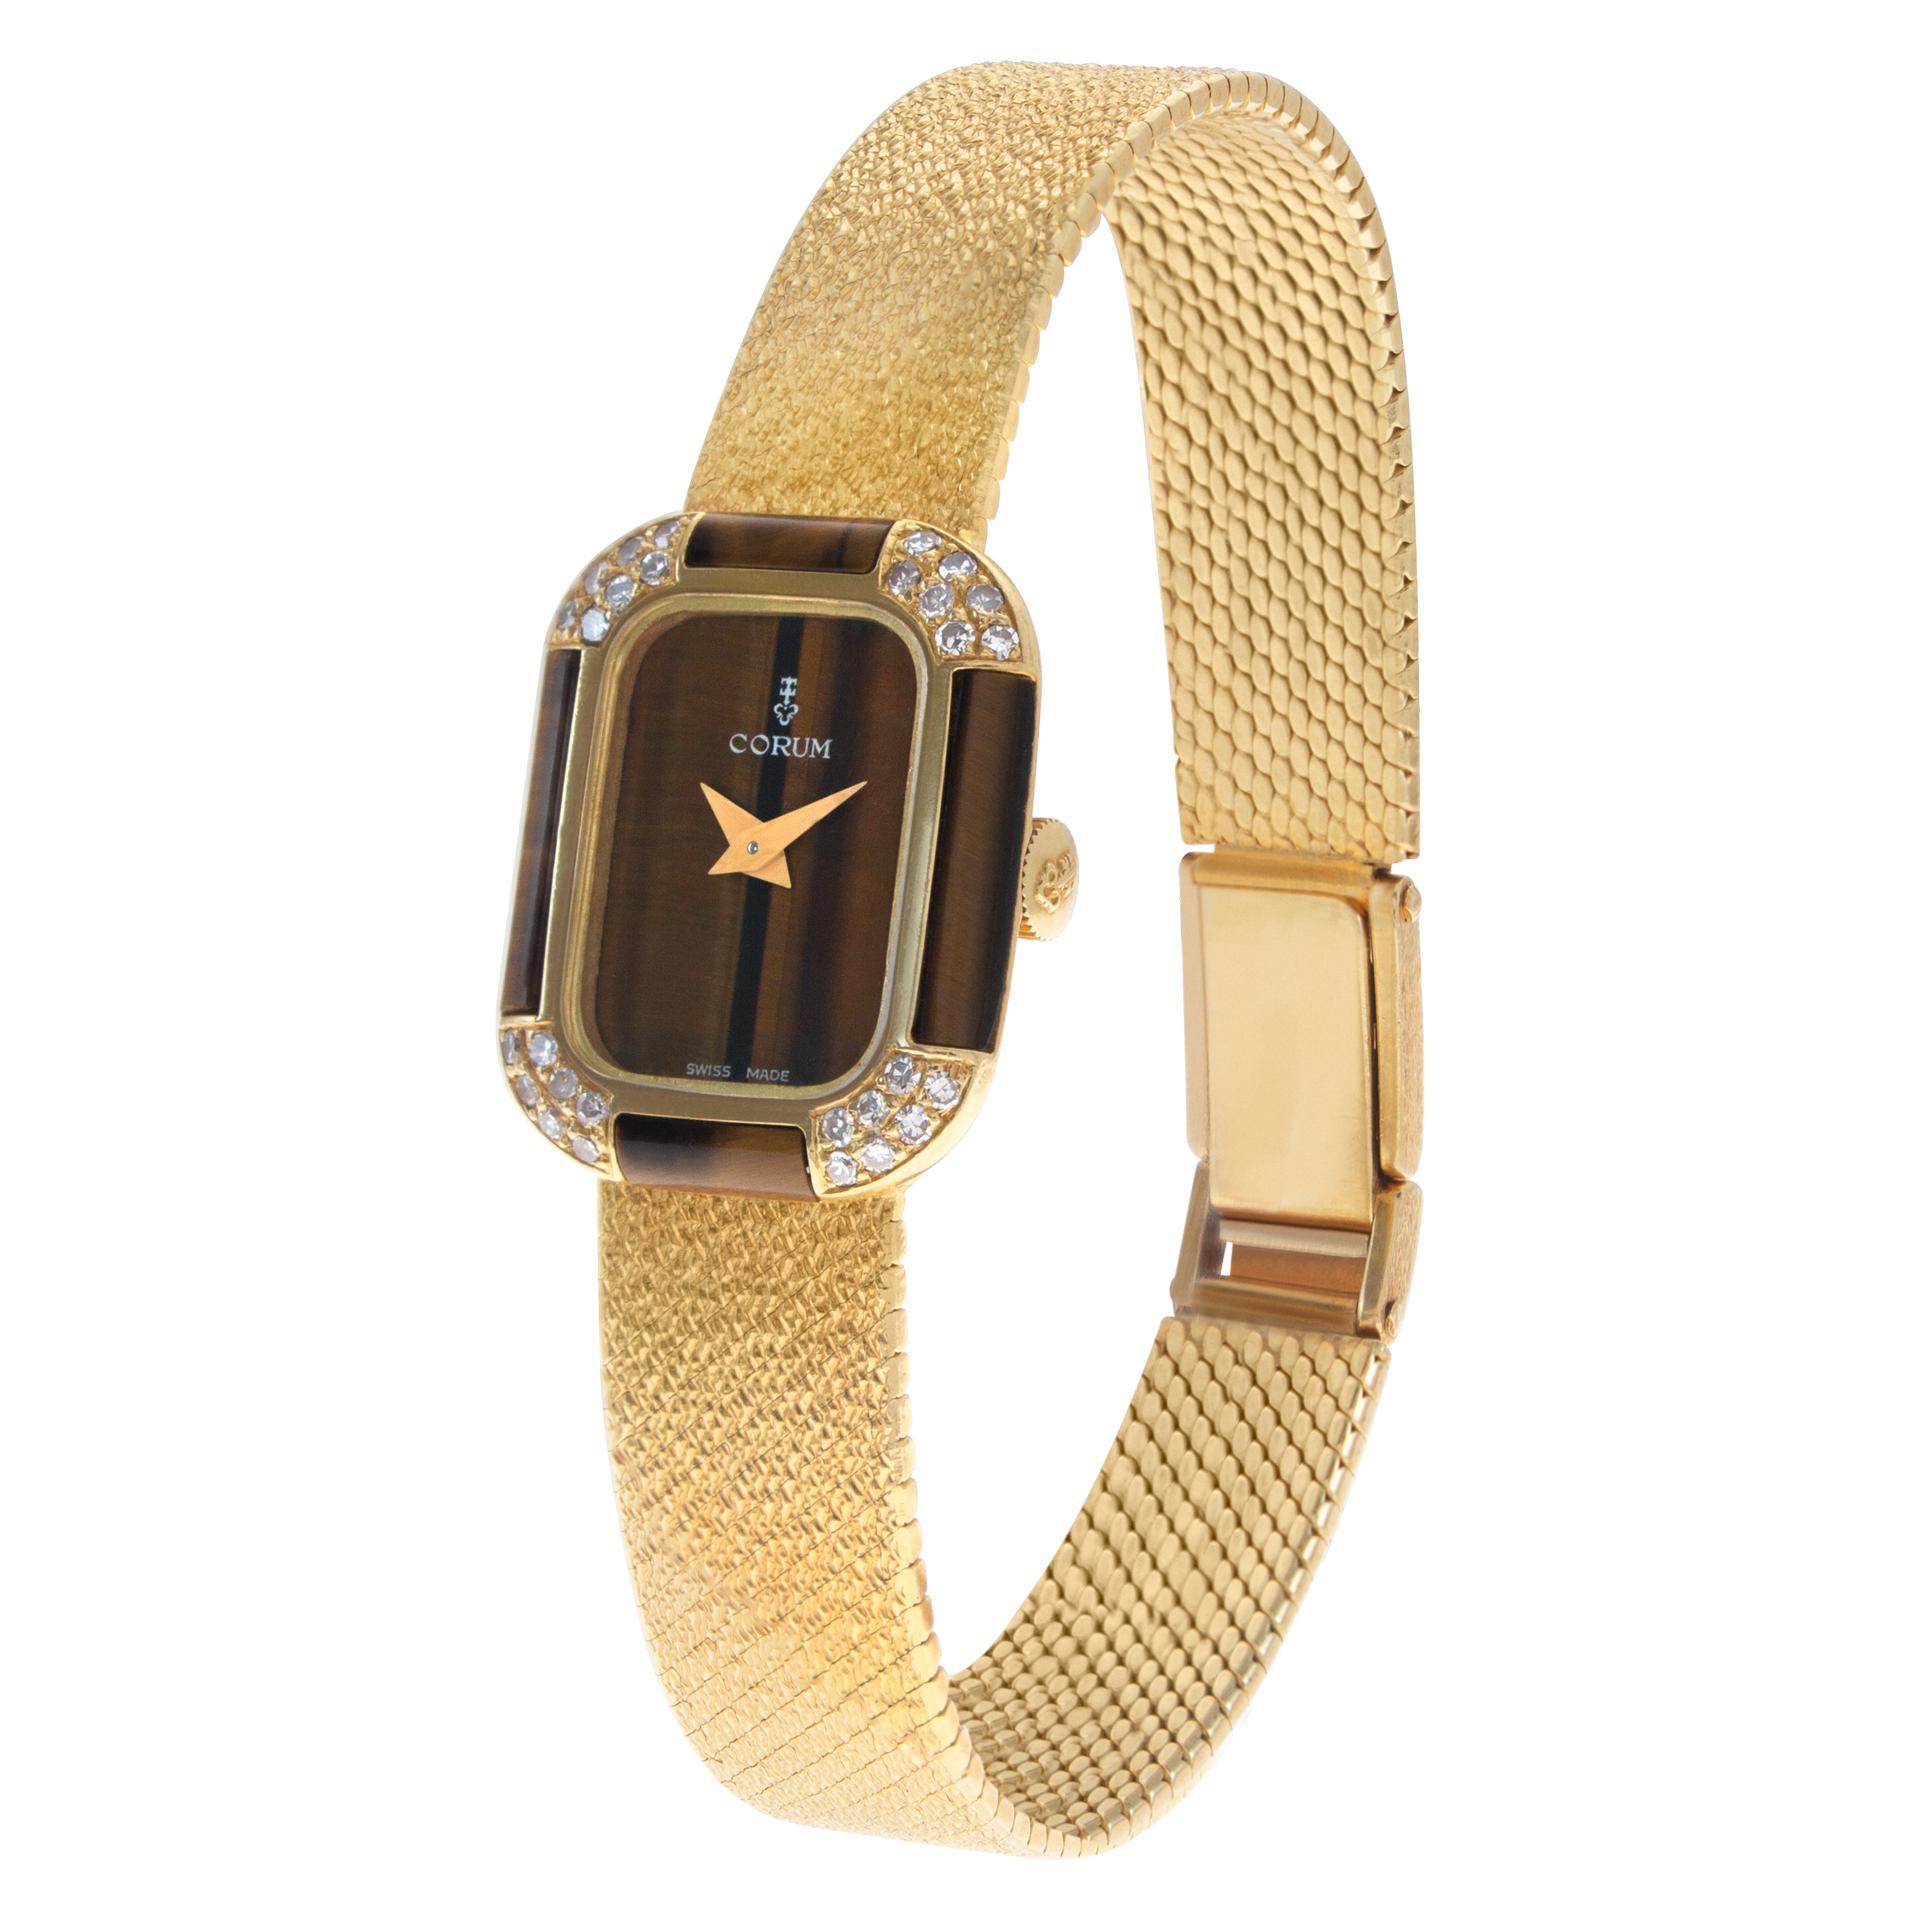 Corum Classic dress watch with tiger eye dial & case with diamond accents on the bezel. Fits 6 inches wrist. Manual wind. 18.5 mm case size. Ref 17142B47. Circa 1990s. Fine Pre-owned Corum Watch.

Certified preowned Dress Corum Classic 17142B47